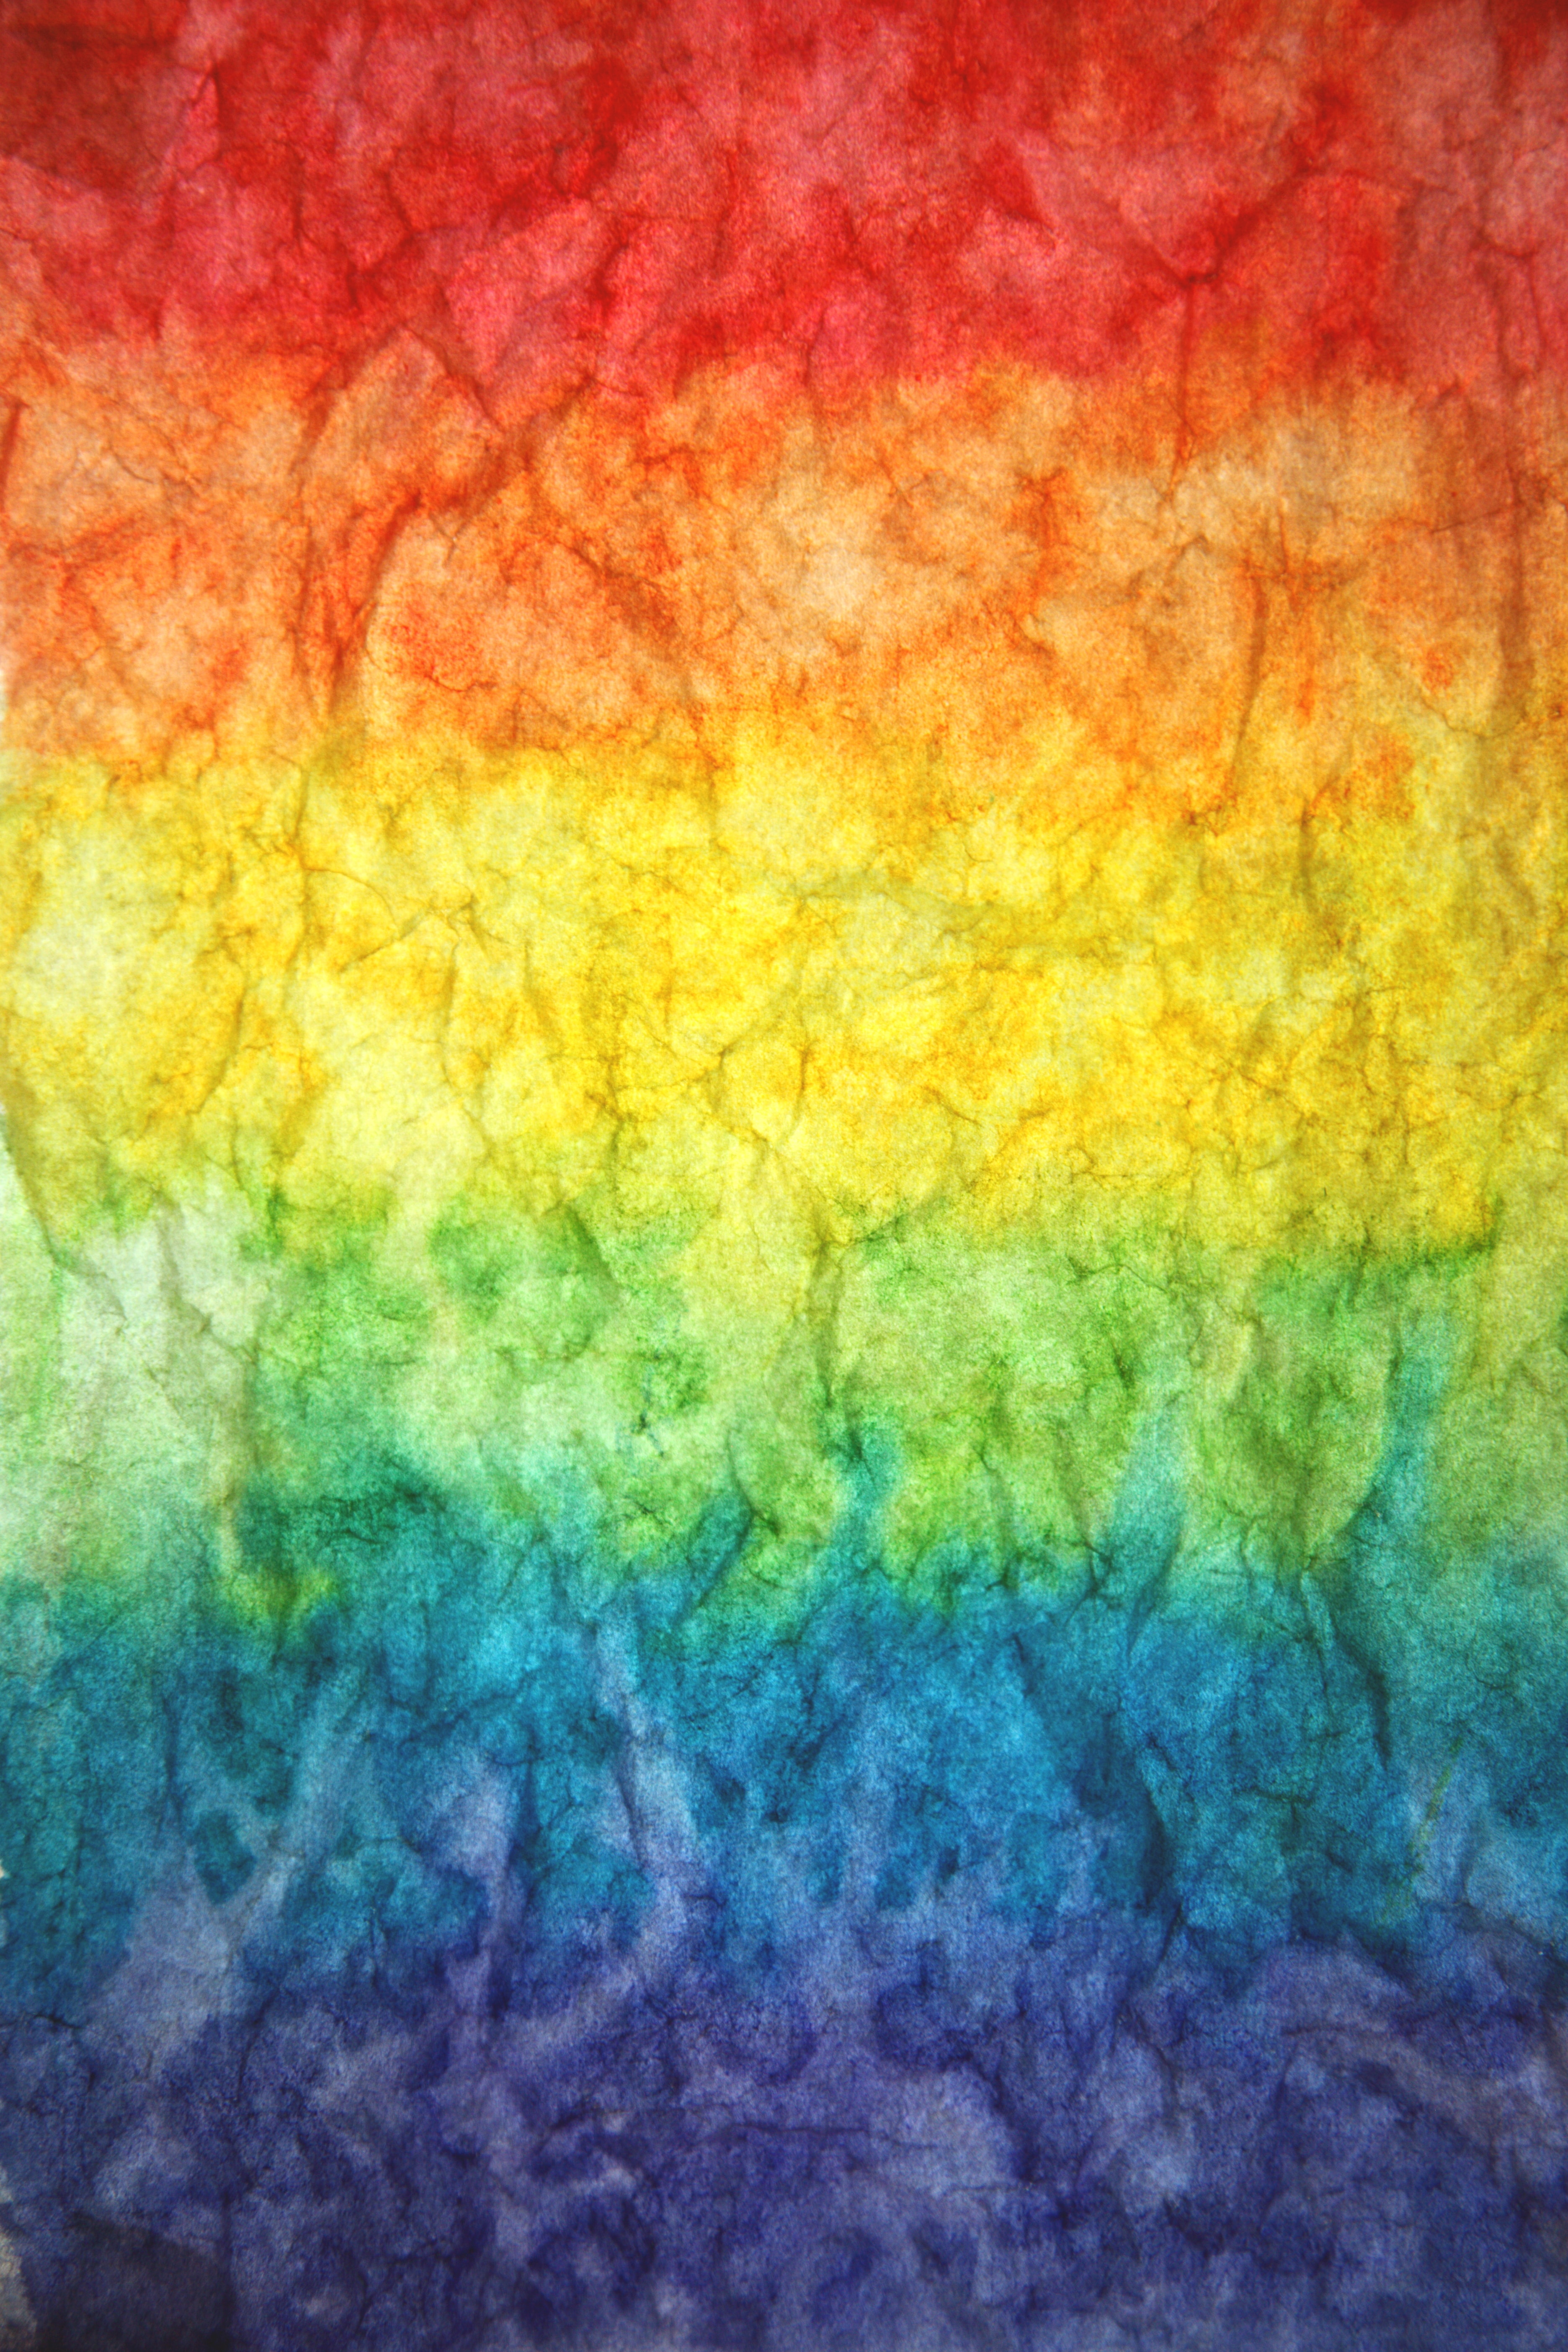 rainbow, spots, multicolored, motley, texture, textures, stains cellphone